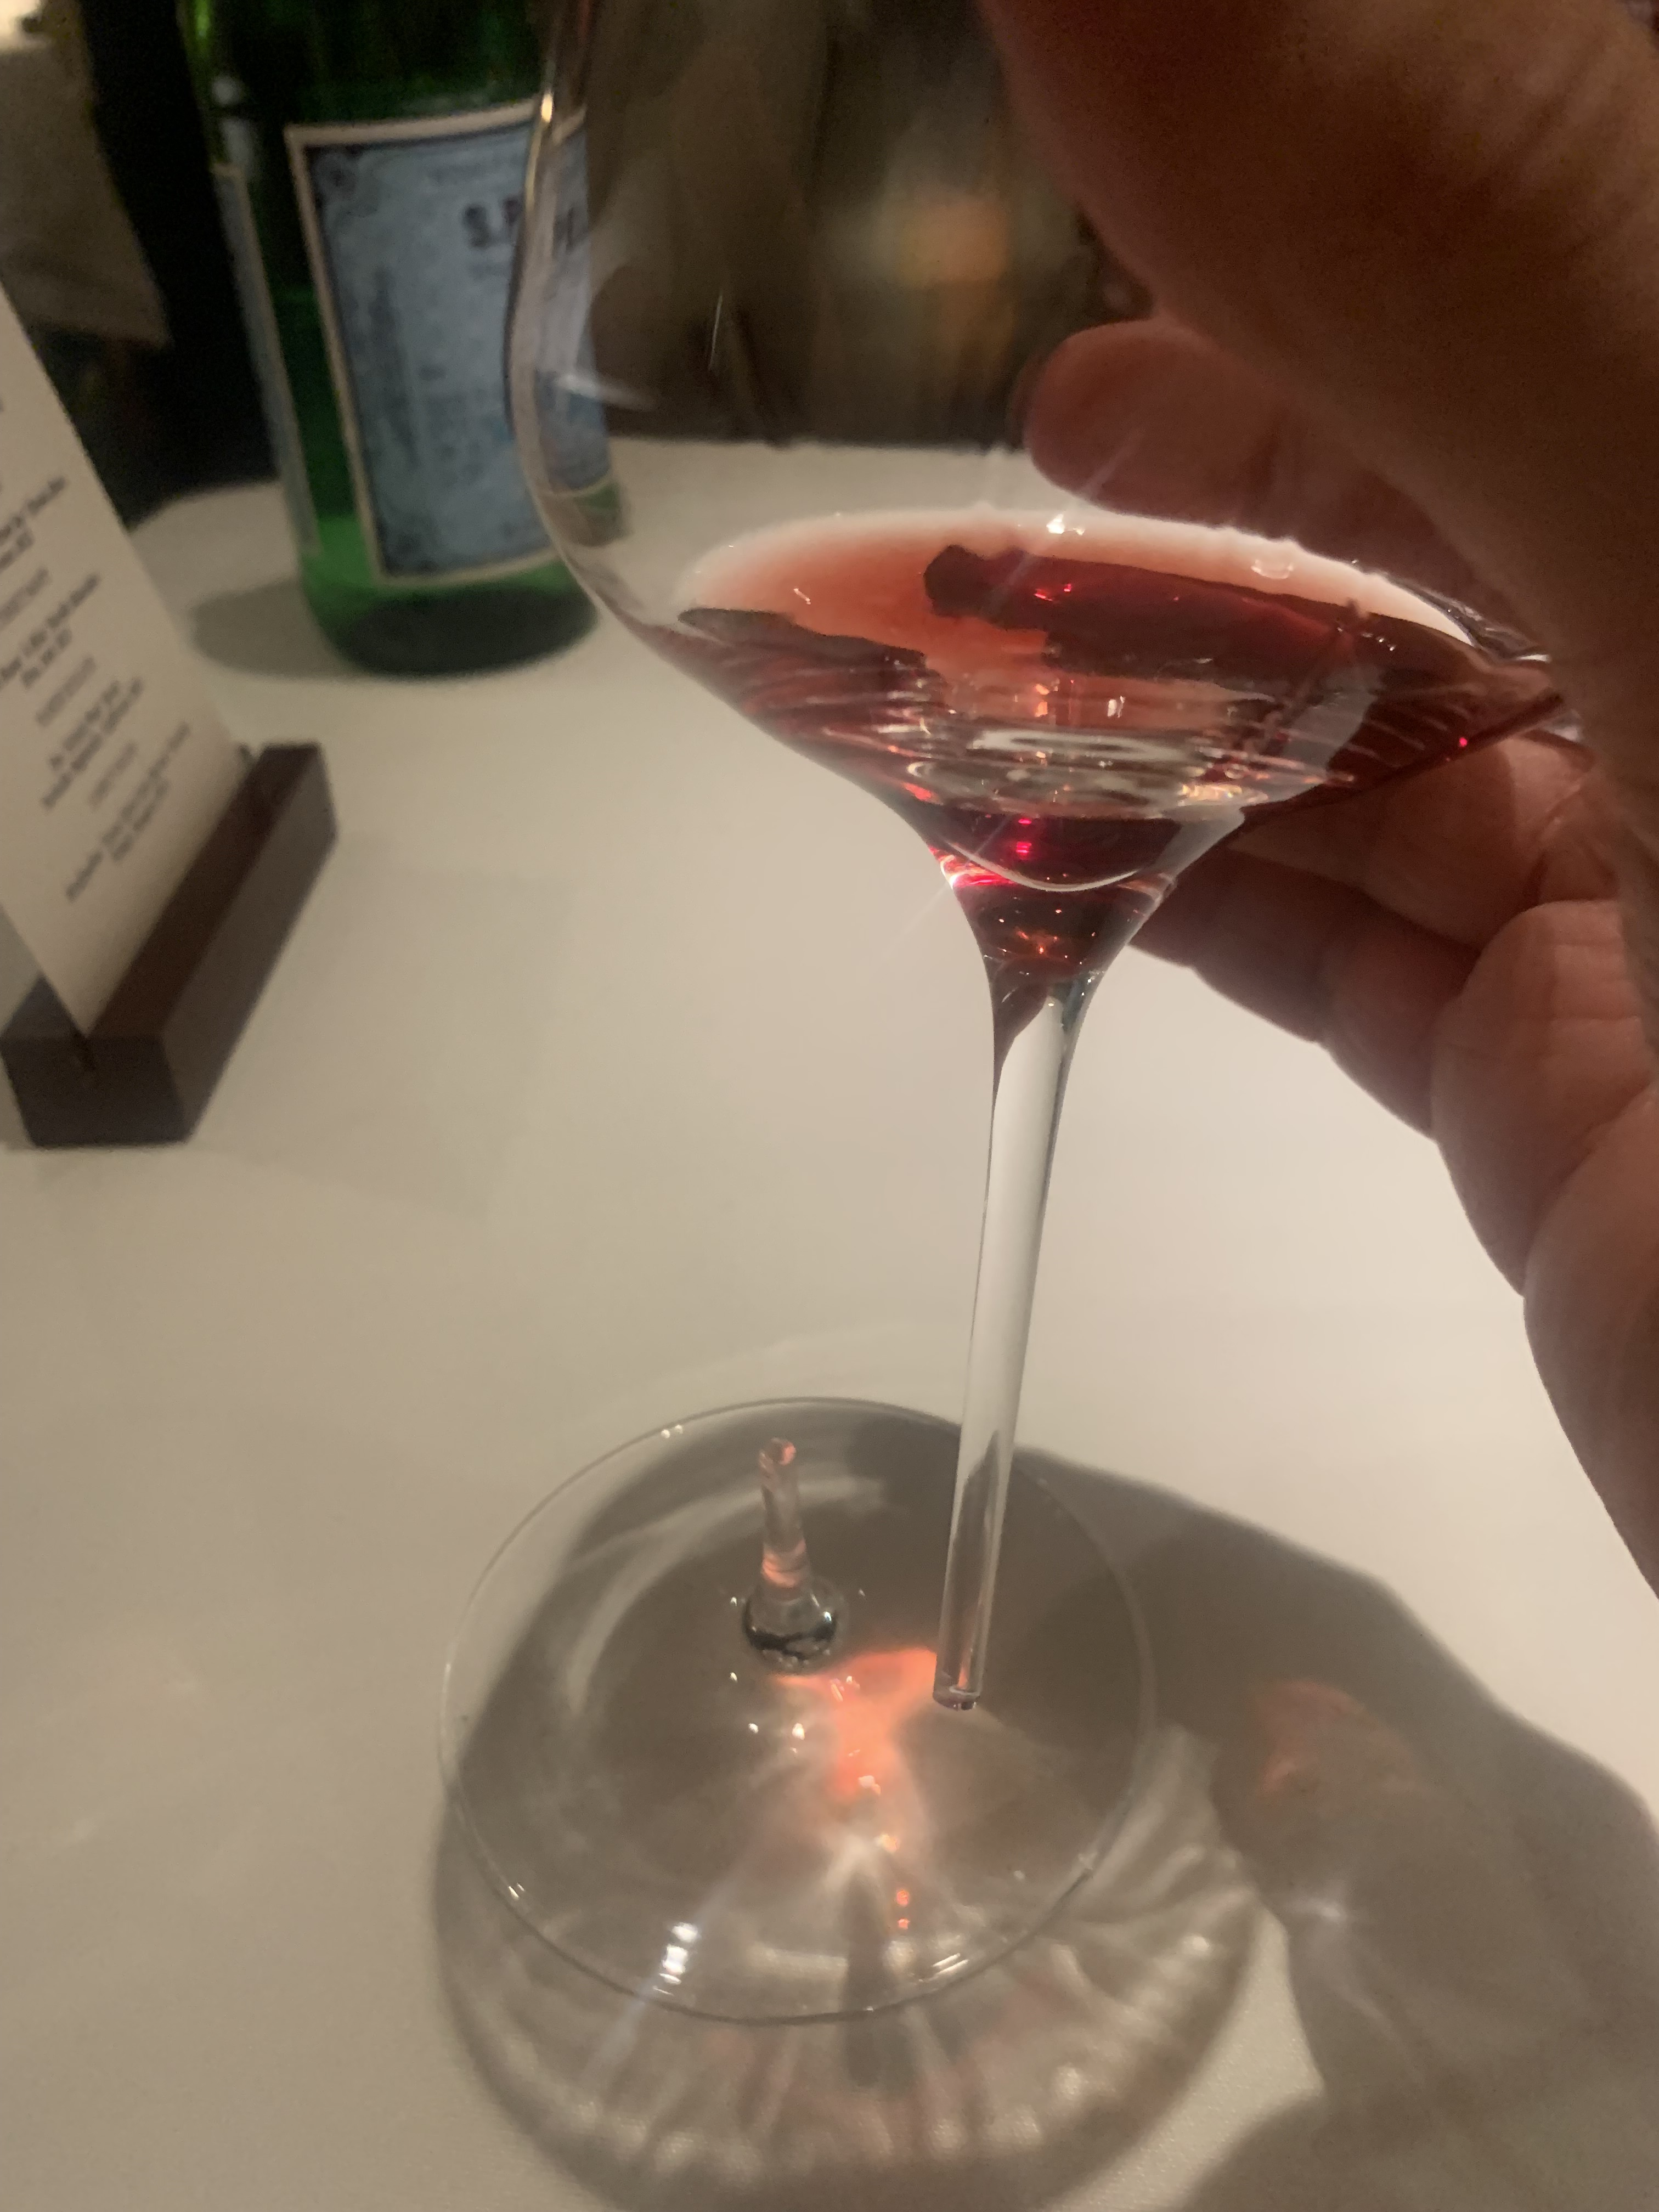 A wine glass with a very thin stem. The stem has broken, and a hand holds the wine glass while the base sits on the table. There is still a little bit of a light red wine in the glass.